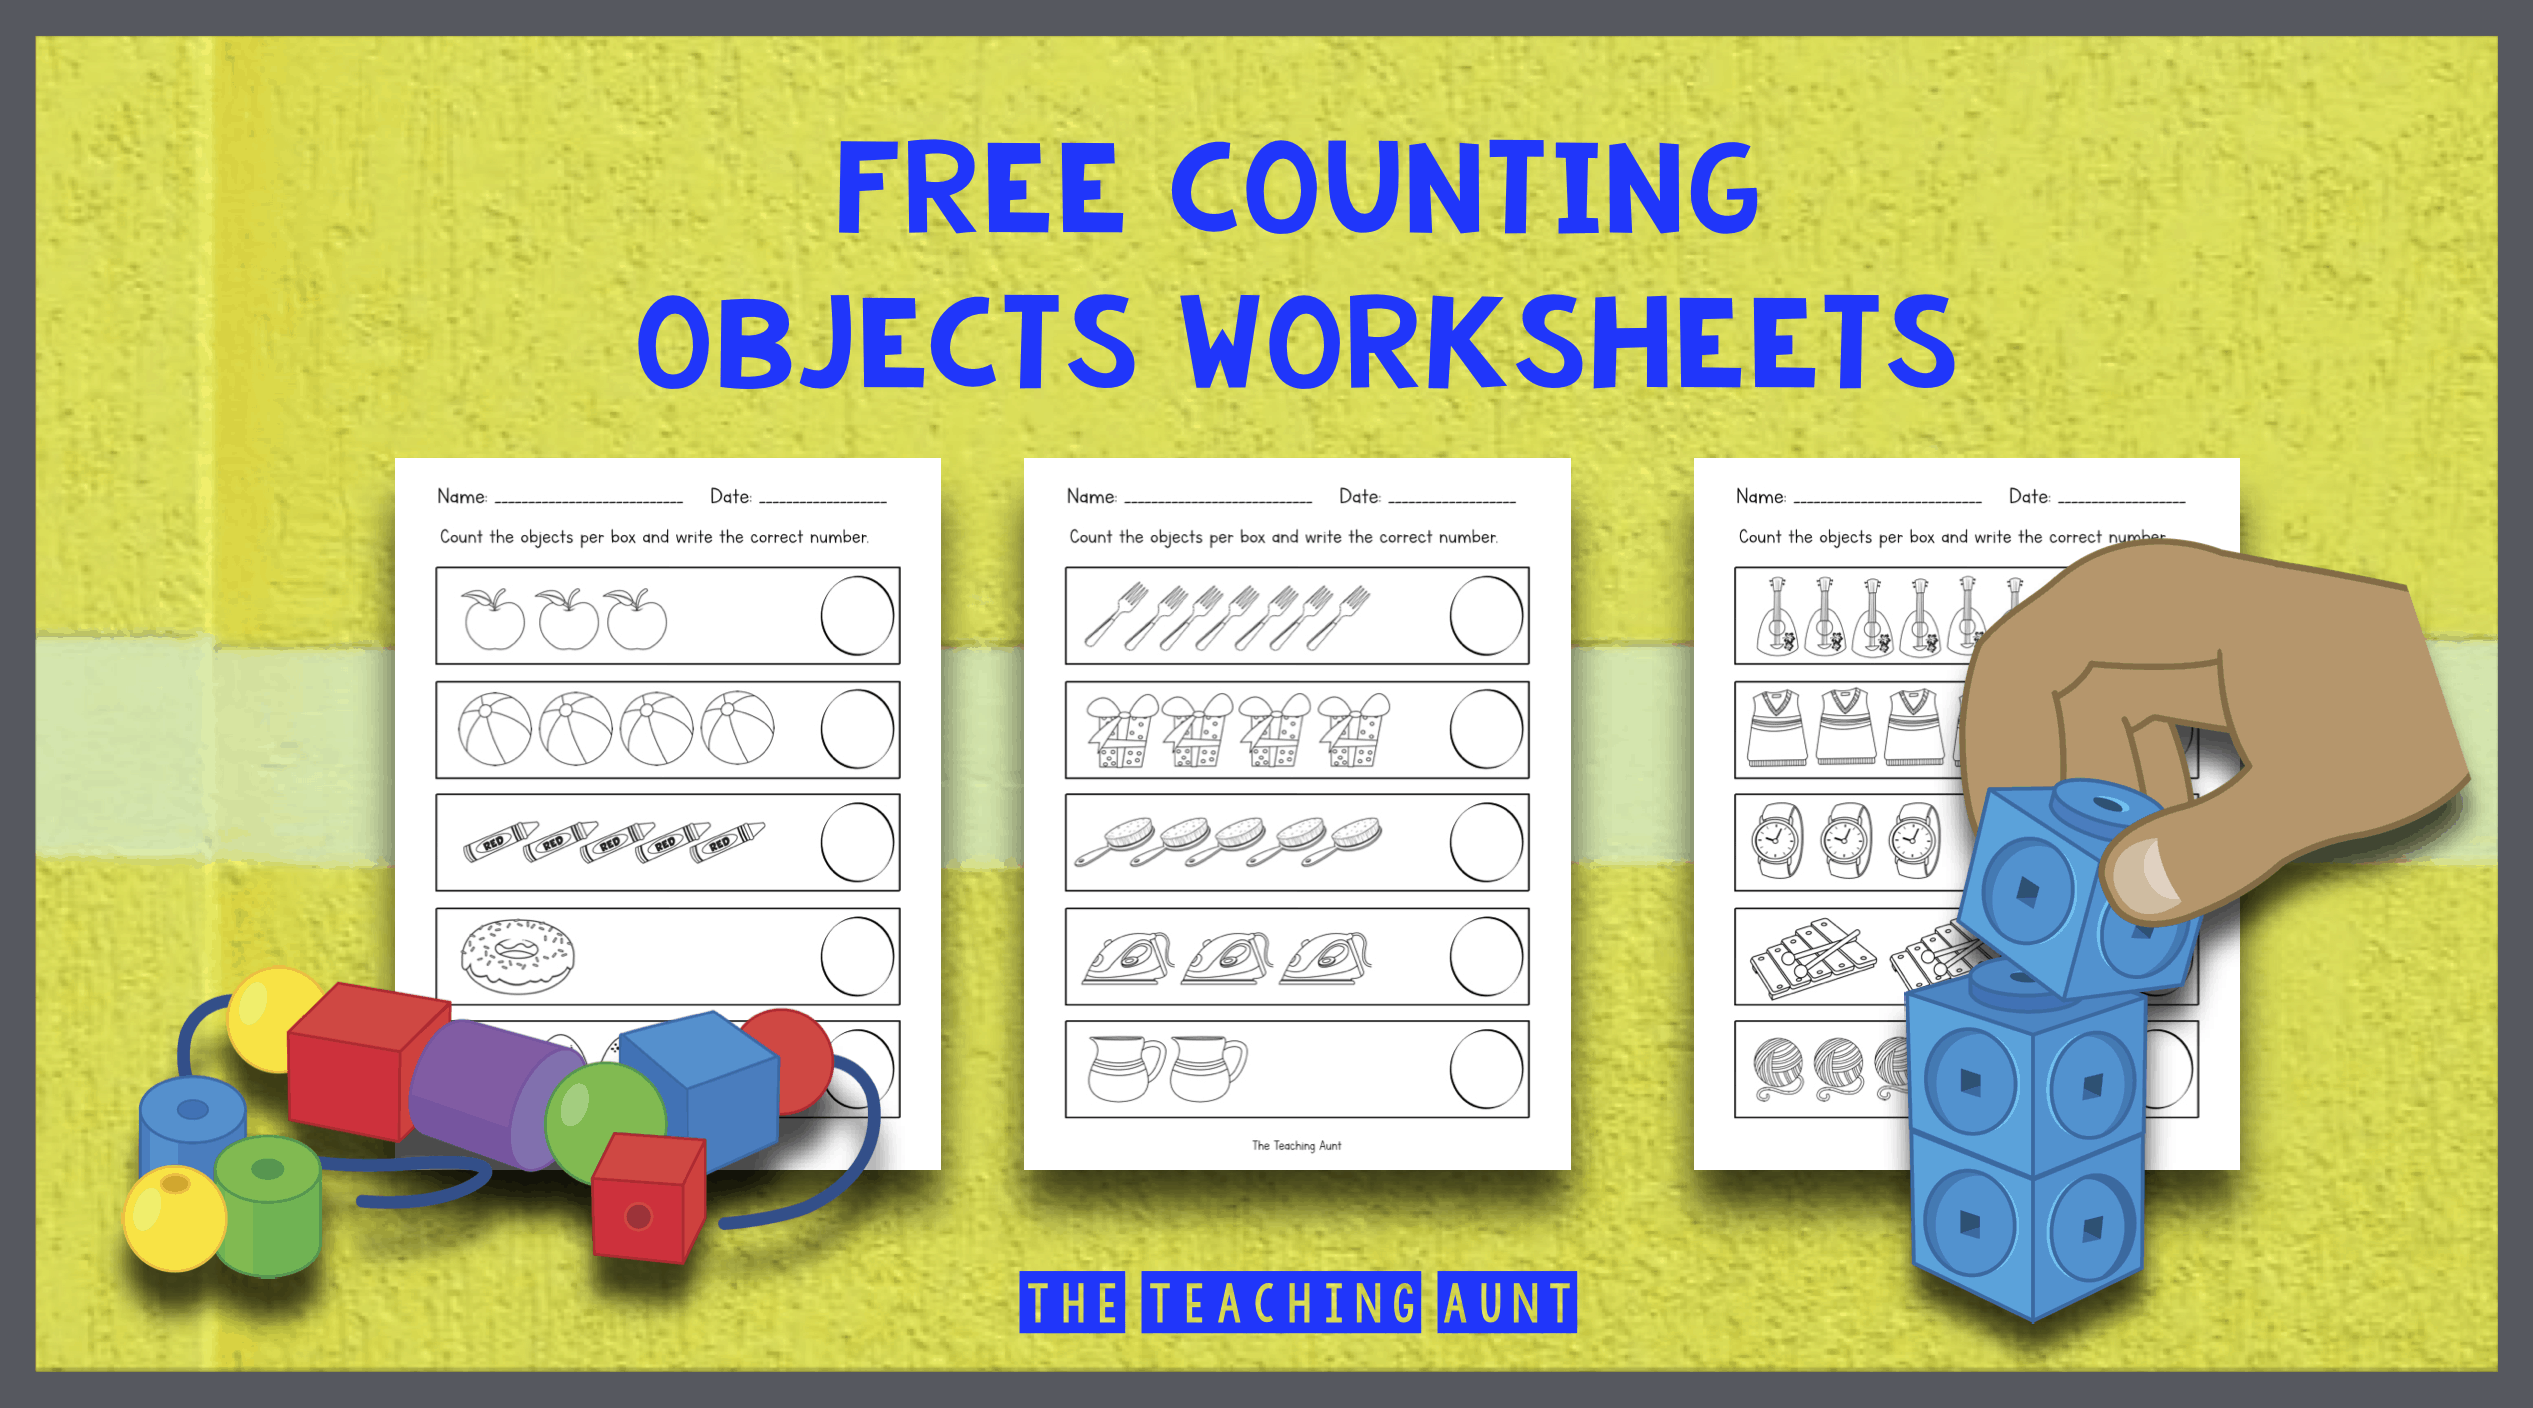 Counting Objects Worksheets